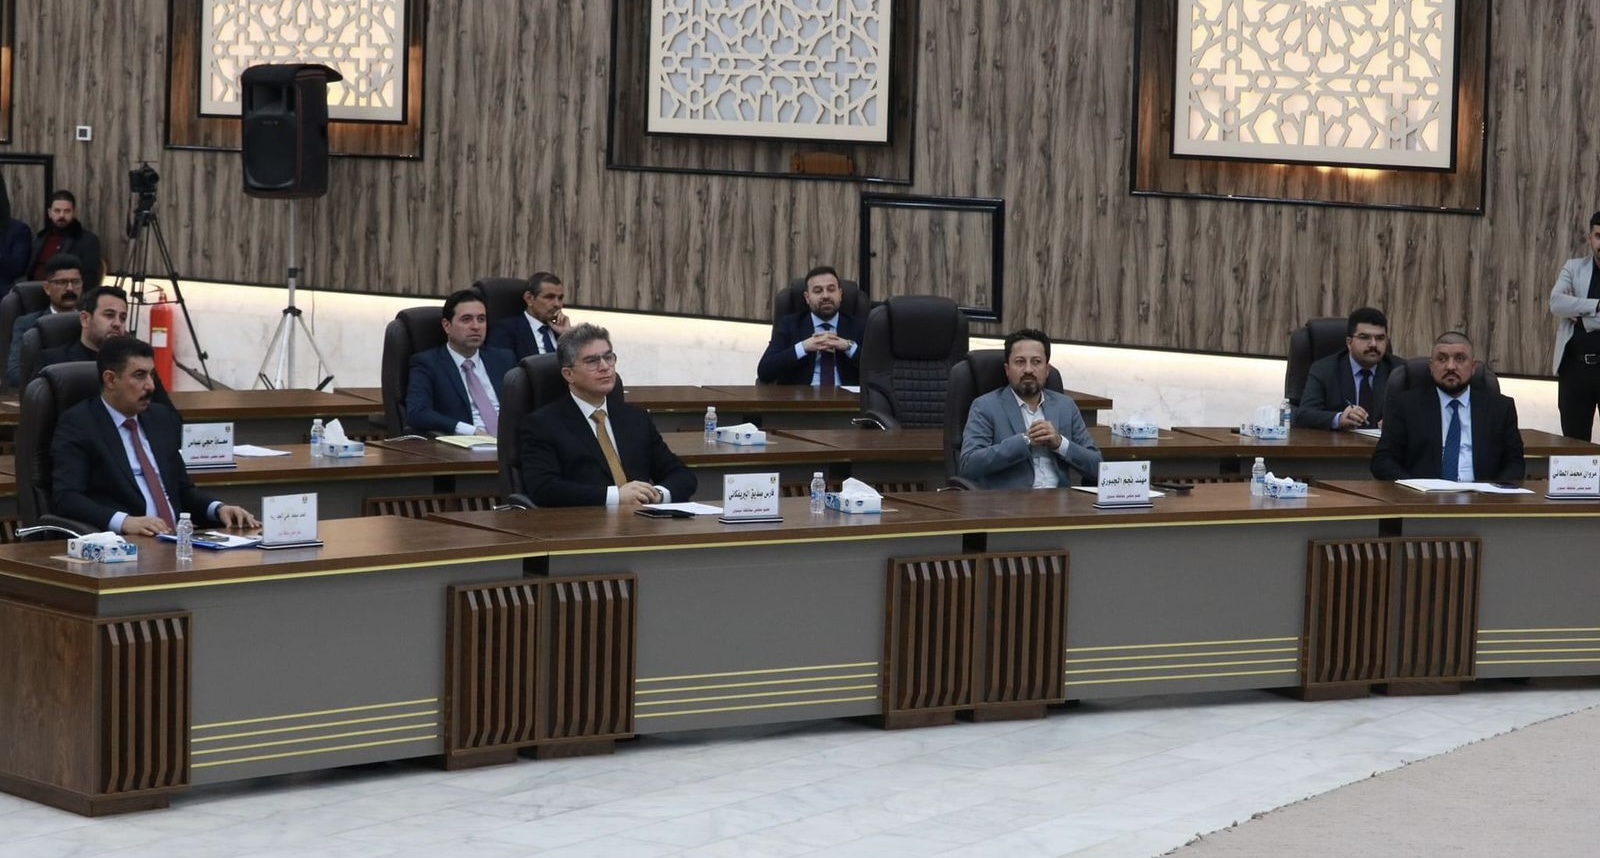 Nineveh Council proceeds with committee distribution despite challenges